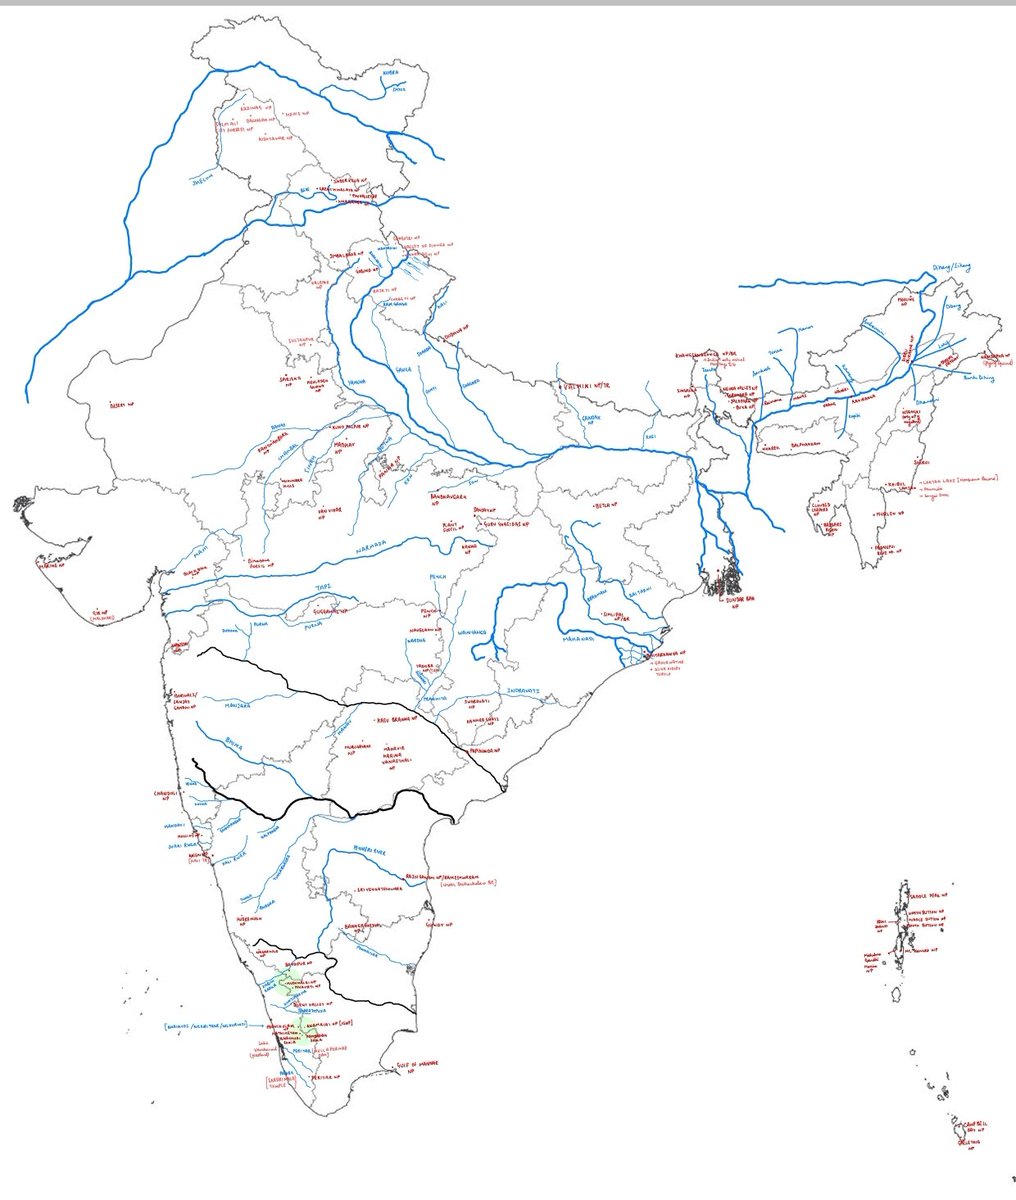 National Parks can give you 2-4 marks easily in every exam either #UPSC or state psc.

This image is of National park located on Rivers.

Clear image of this map is on my telegram.

Save🔖and revise.